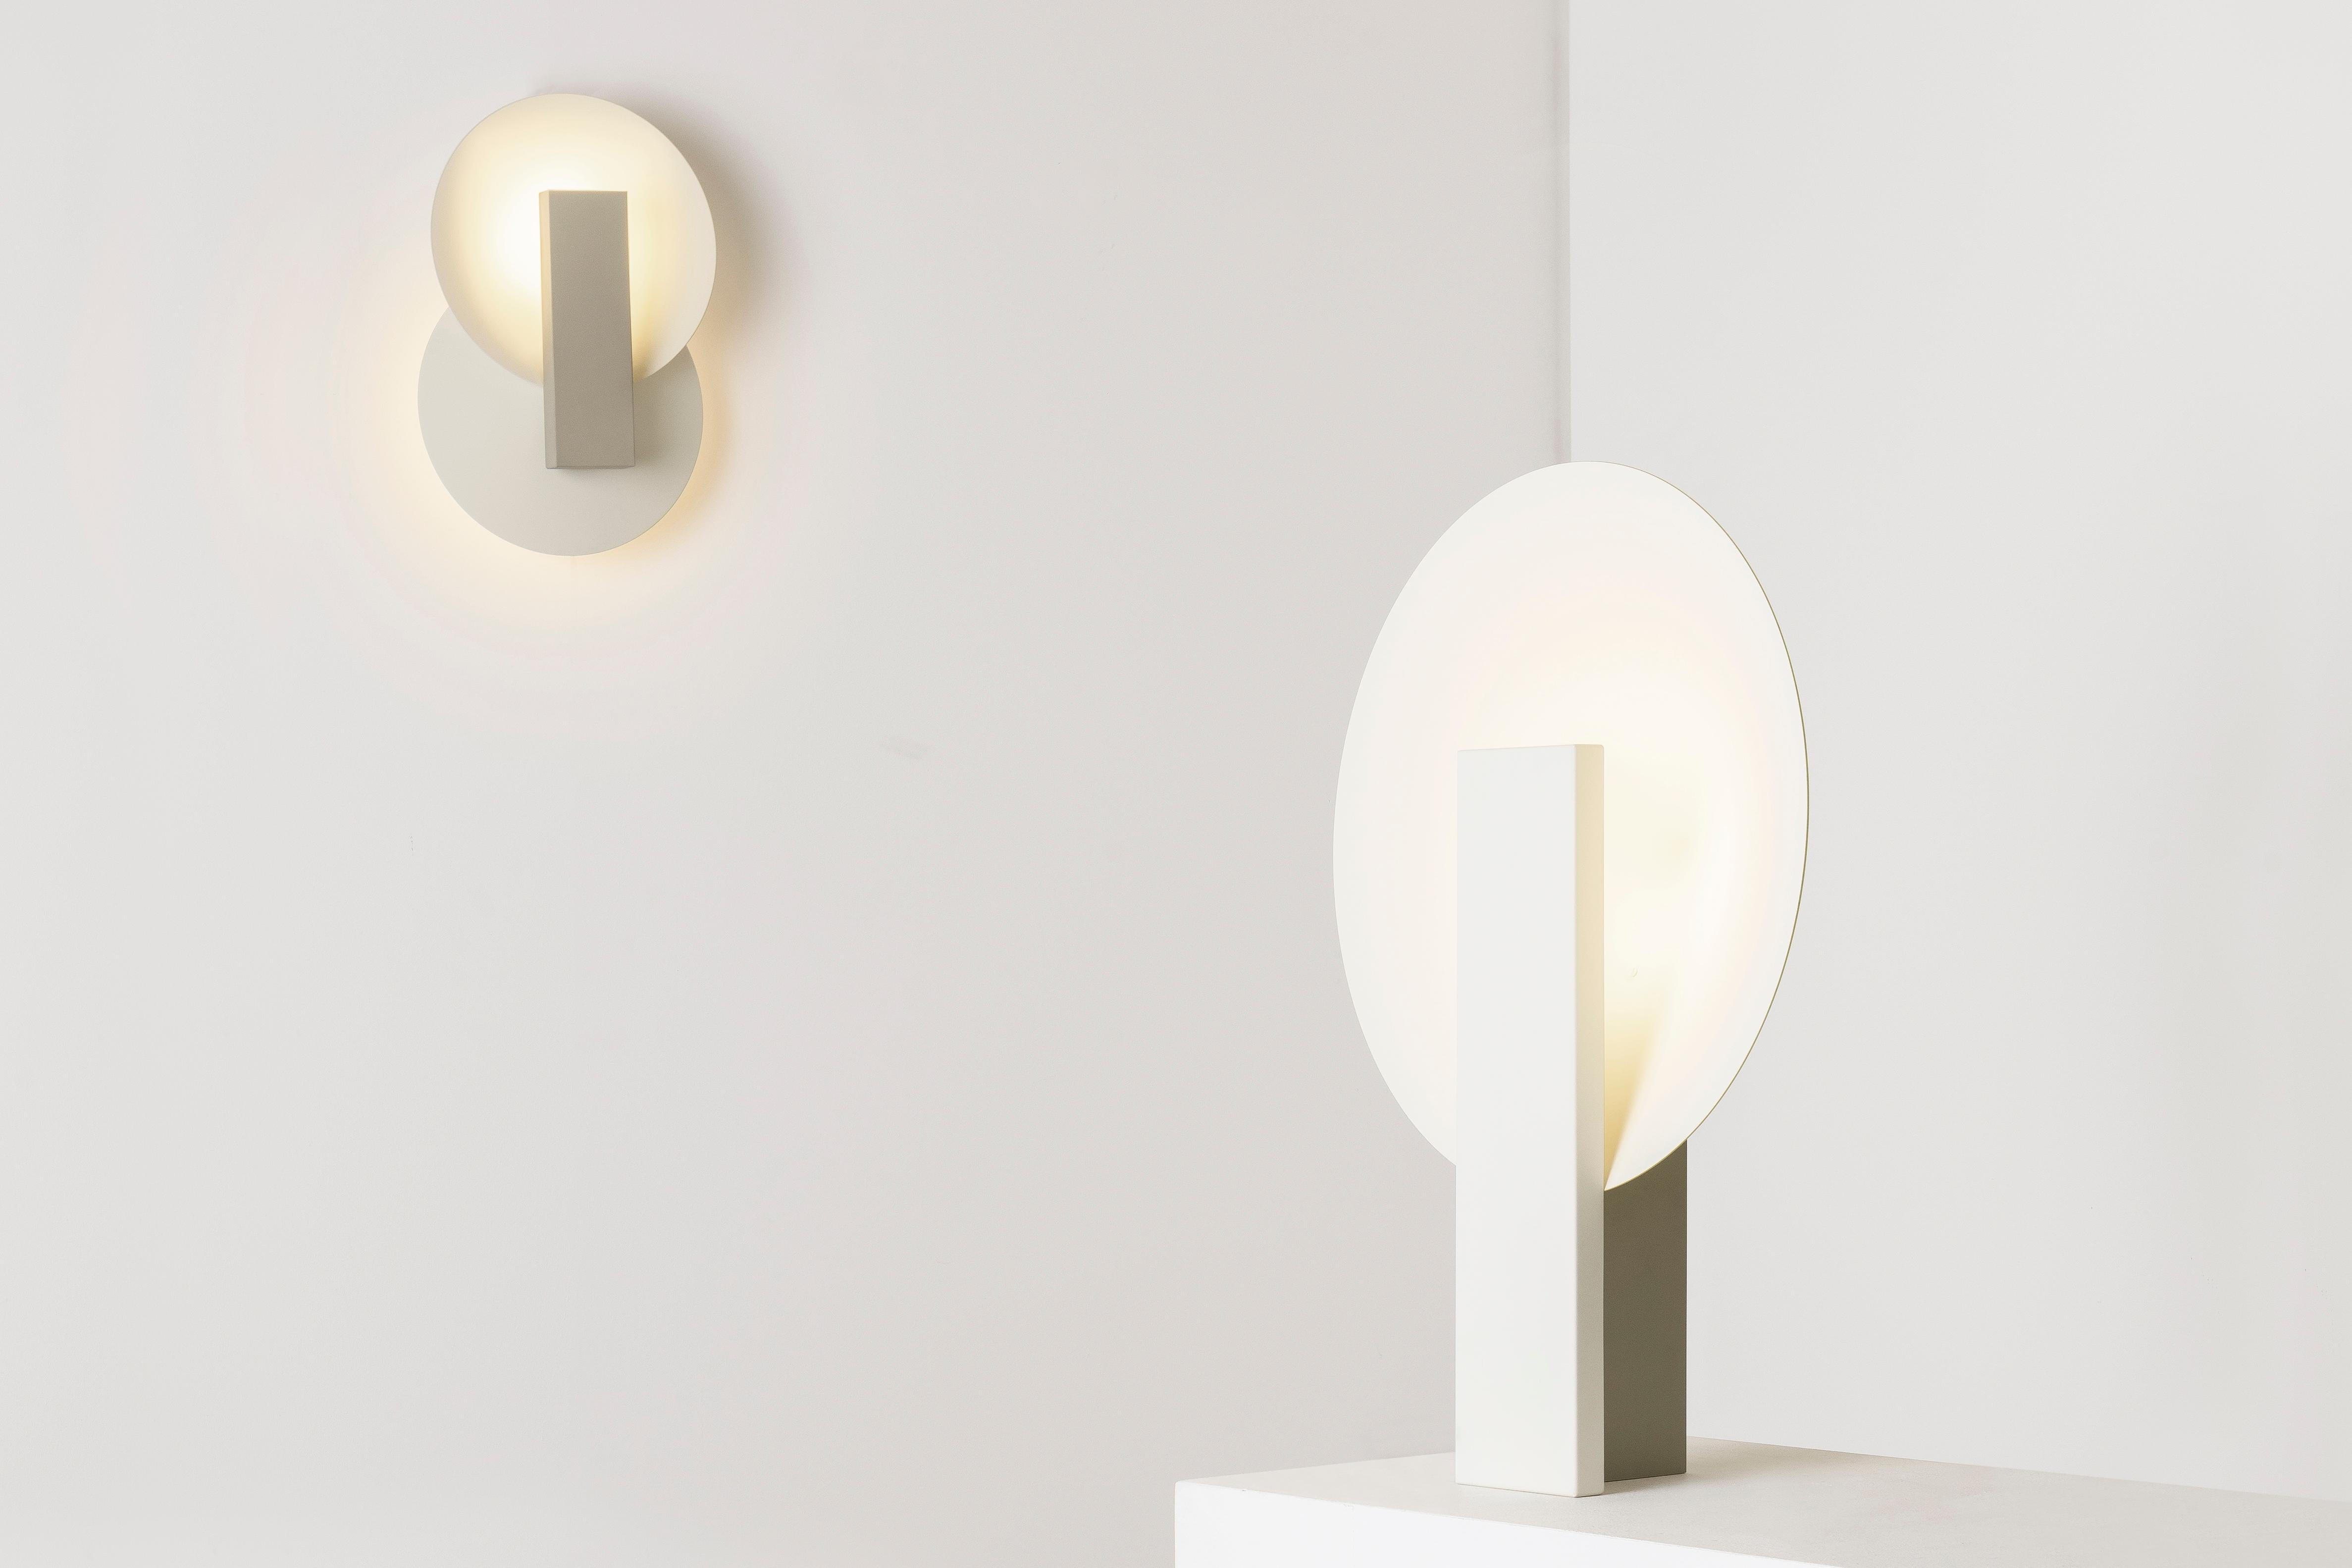 Orbe is a wall lamp with indirect light, designed to provide soft illumination to the environment.

The piece has a simple structure, composed by the minimum required for its functionality: the front box houses the light source and provides the